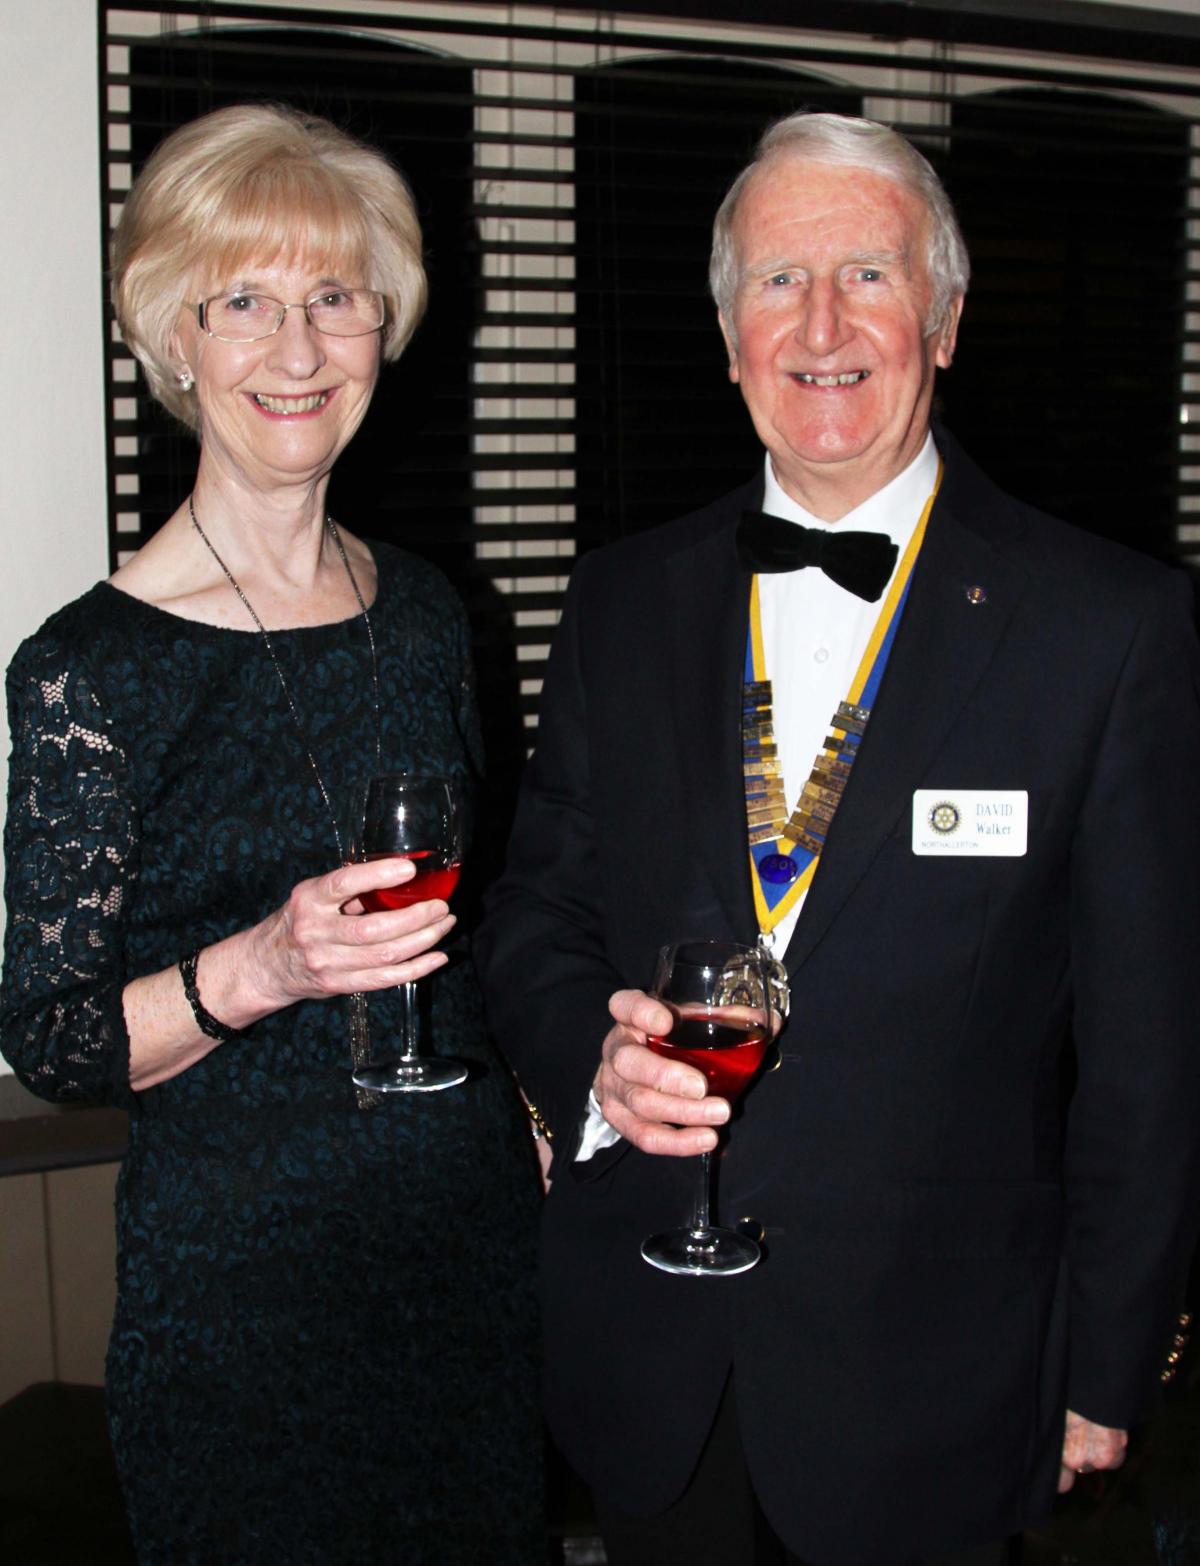 S&P Rotary at Topcliffe Maisie and David Walker from Northallerton.